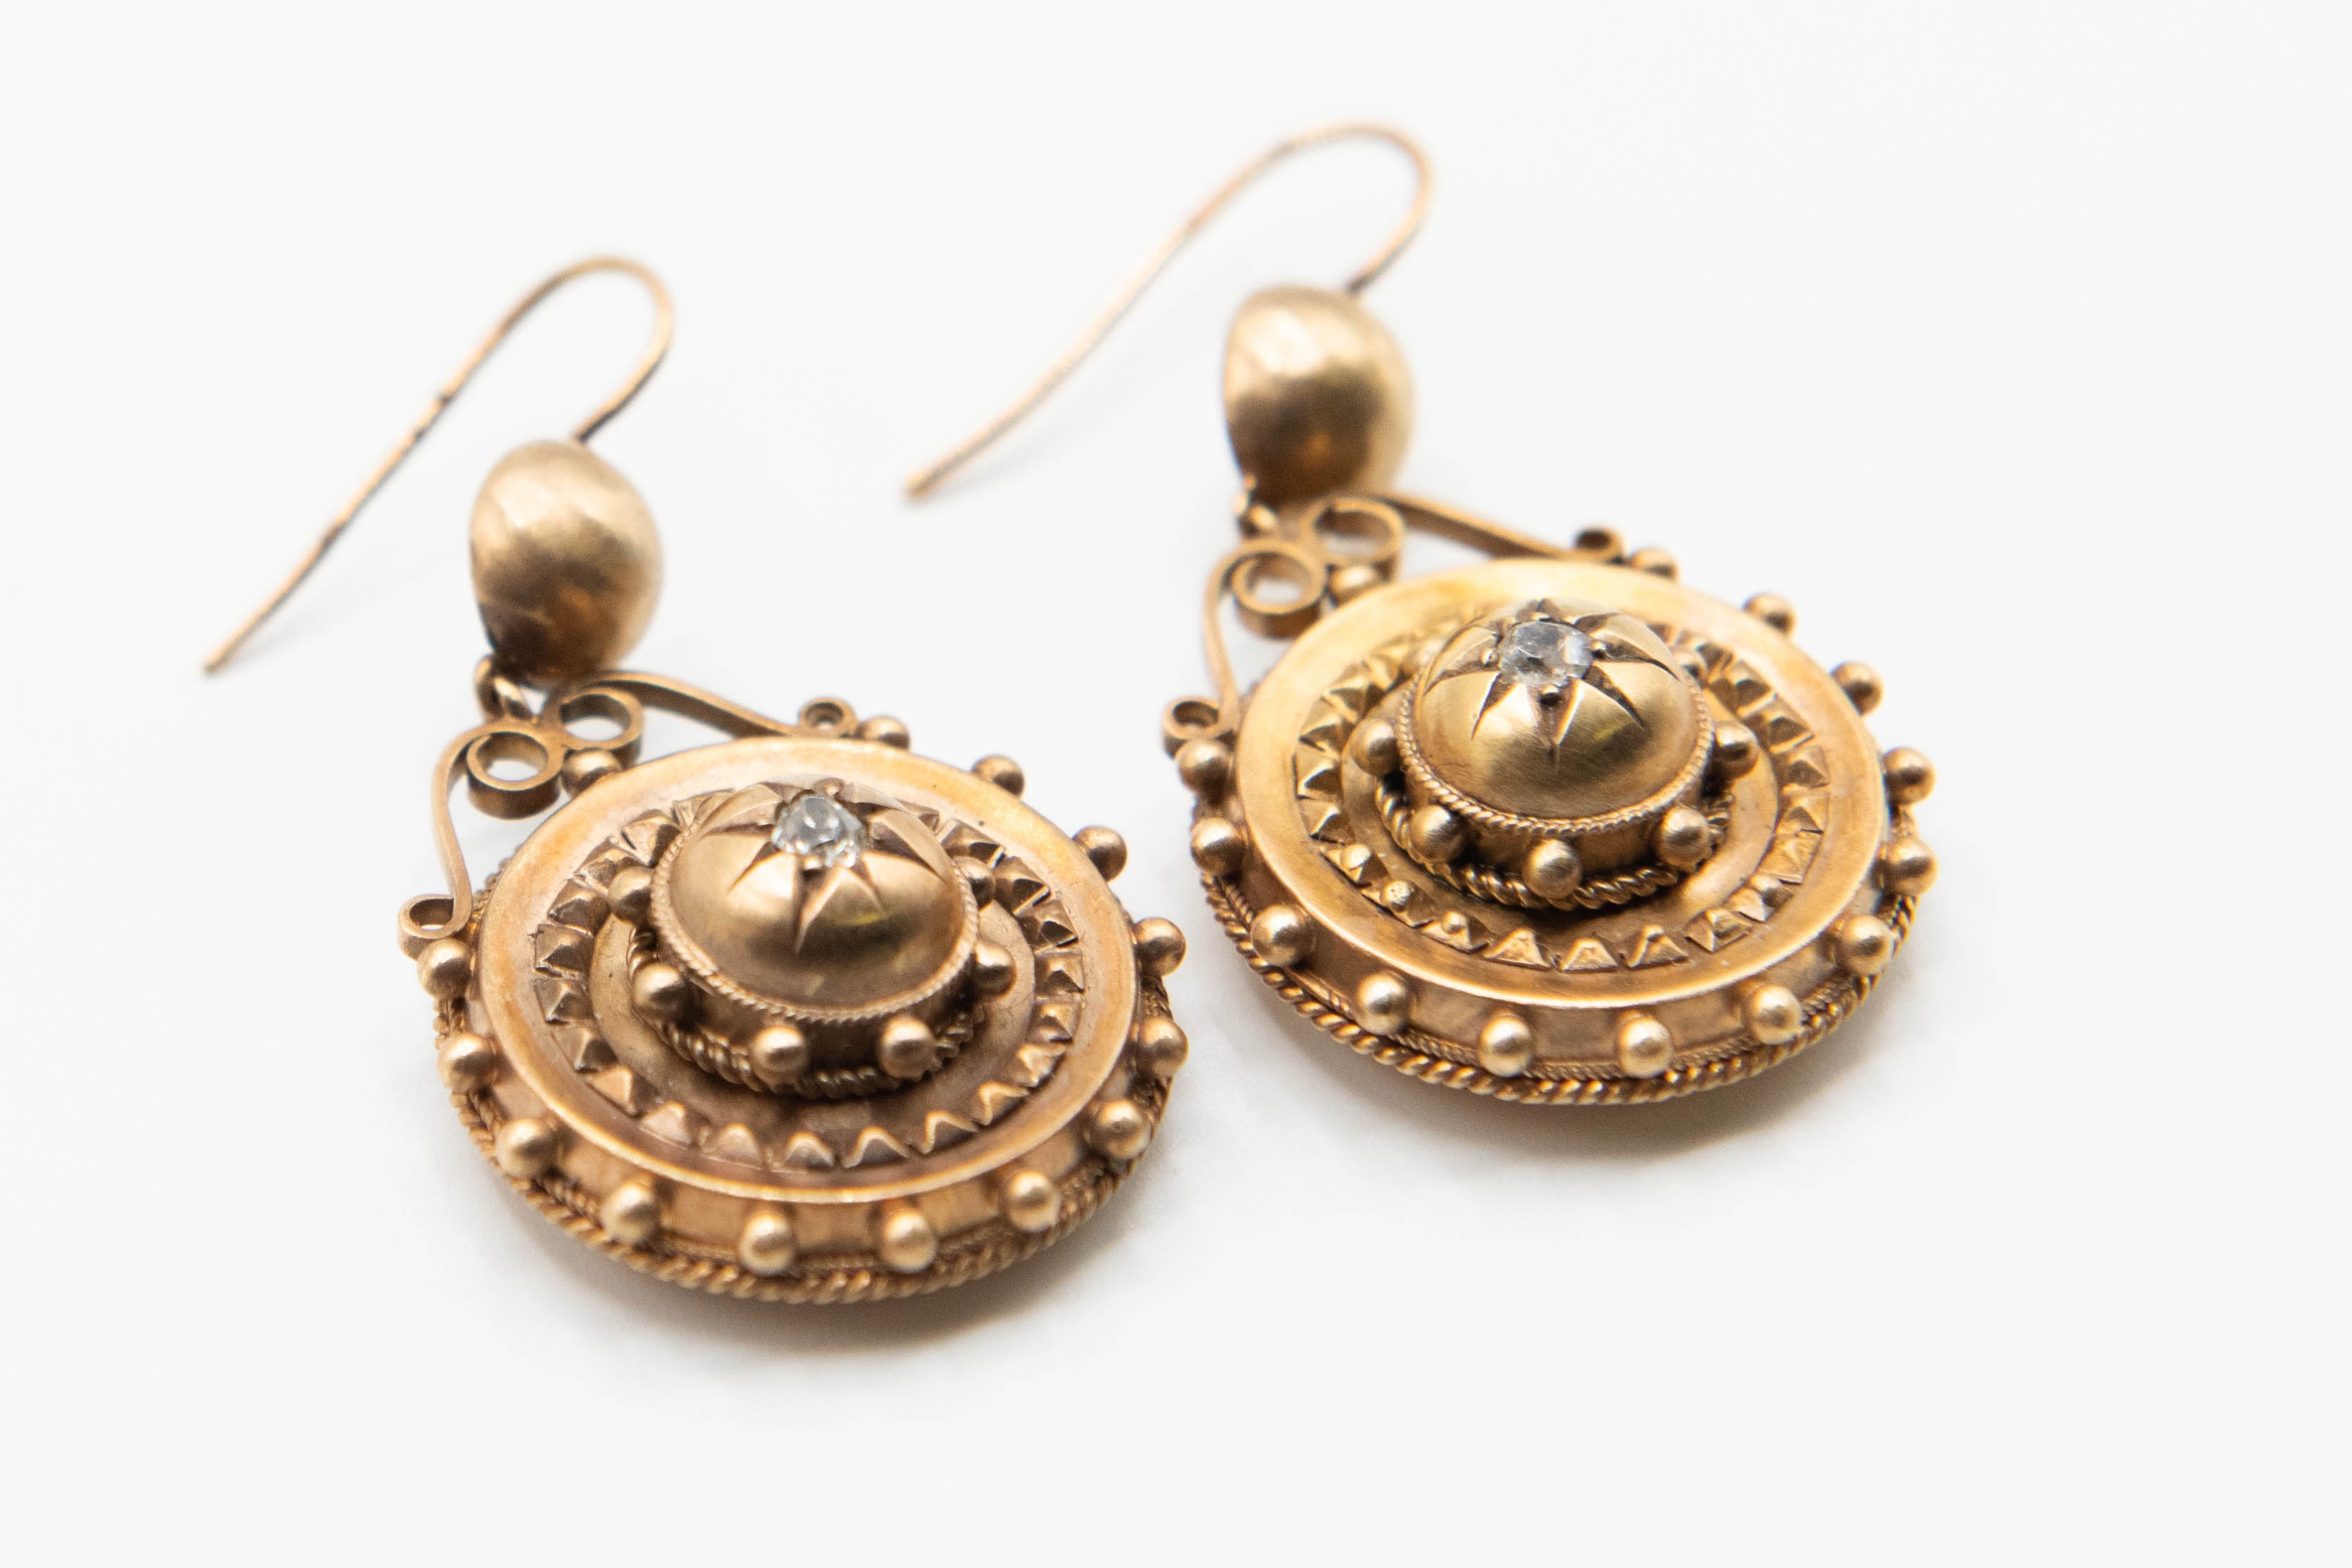 A PAIR OF MID 19TH CENTURY EARRINGS